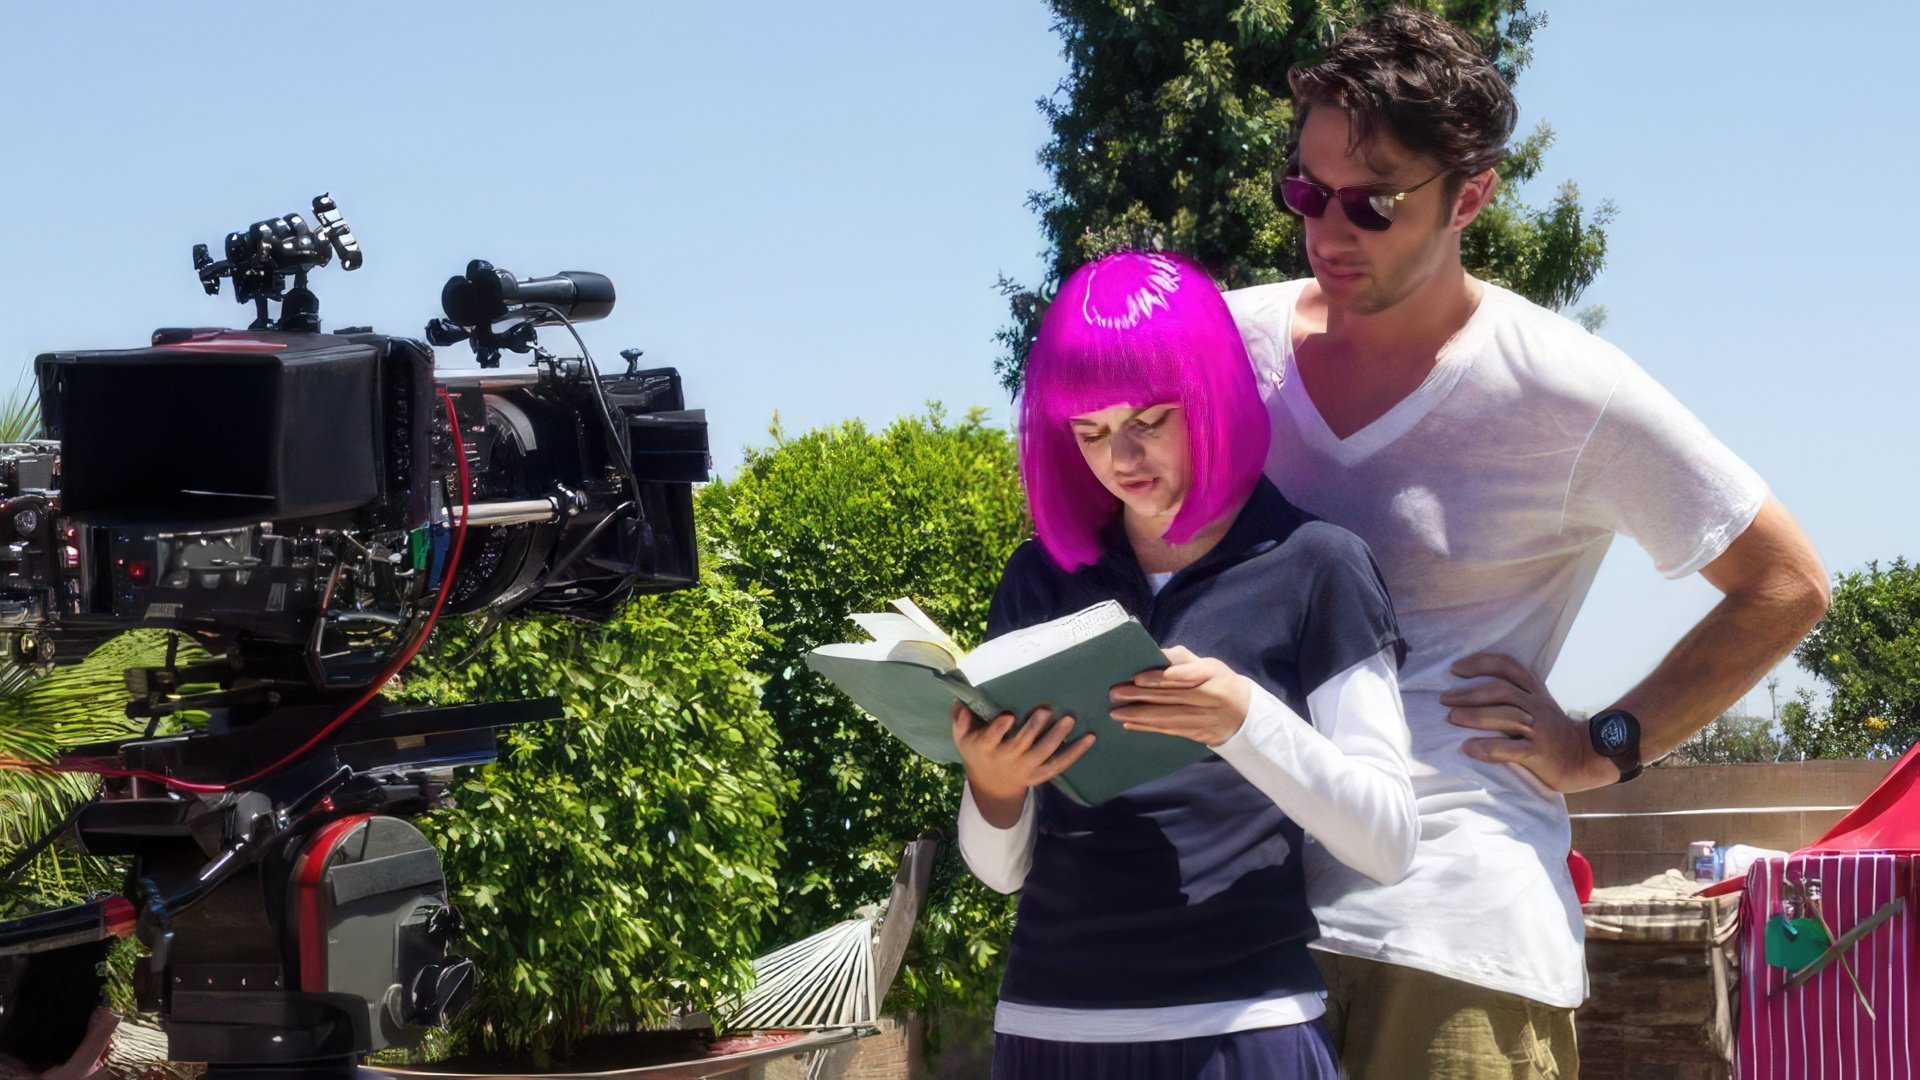 Joey King and Zach Braff on the set of “Wish I Was Here”